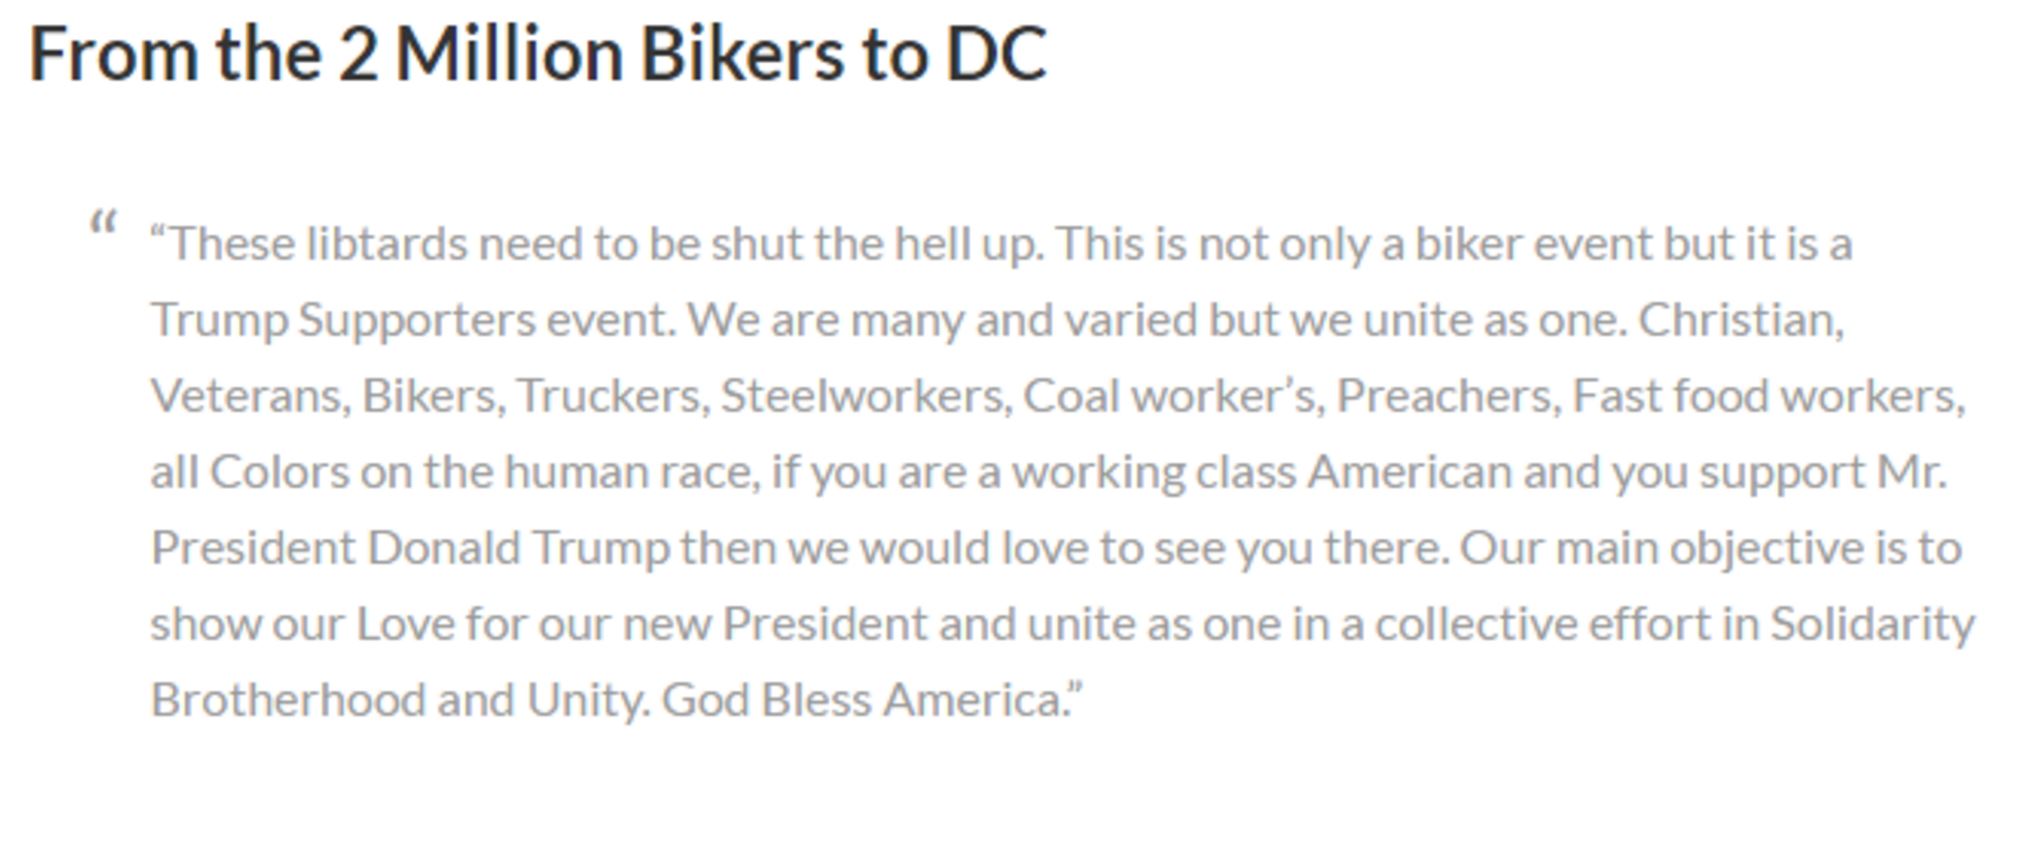 The extended quote from the page reads, “These libtards need to shut the hell up. This is not only a biker event, but it is a Trump Supporters event. We are many and varied but we unite as one.” It is said to be a quote on a Facebook page organizing the event.